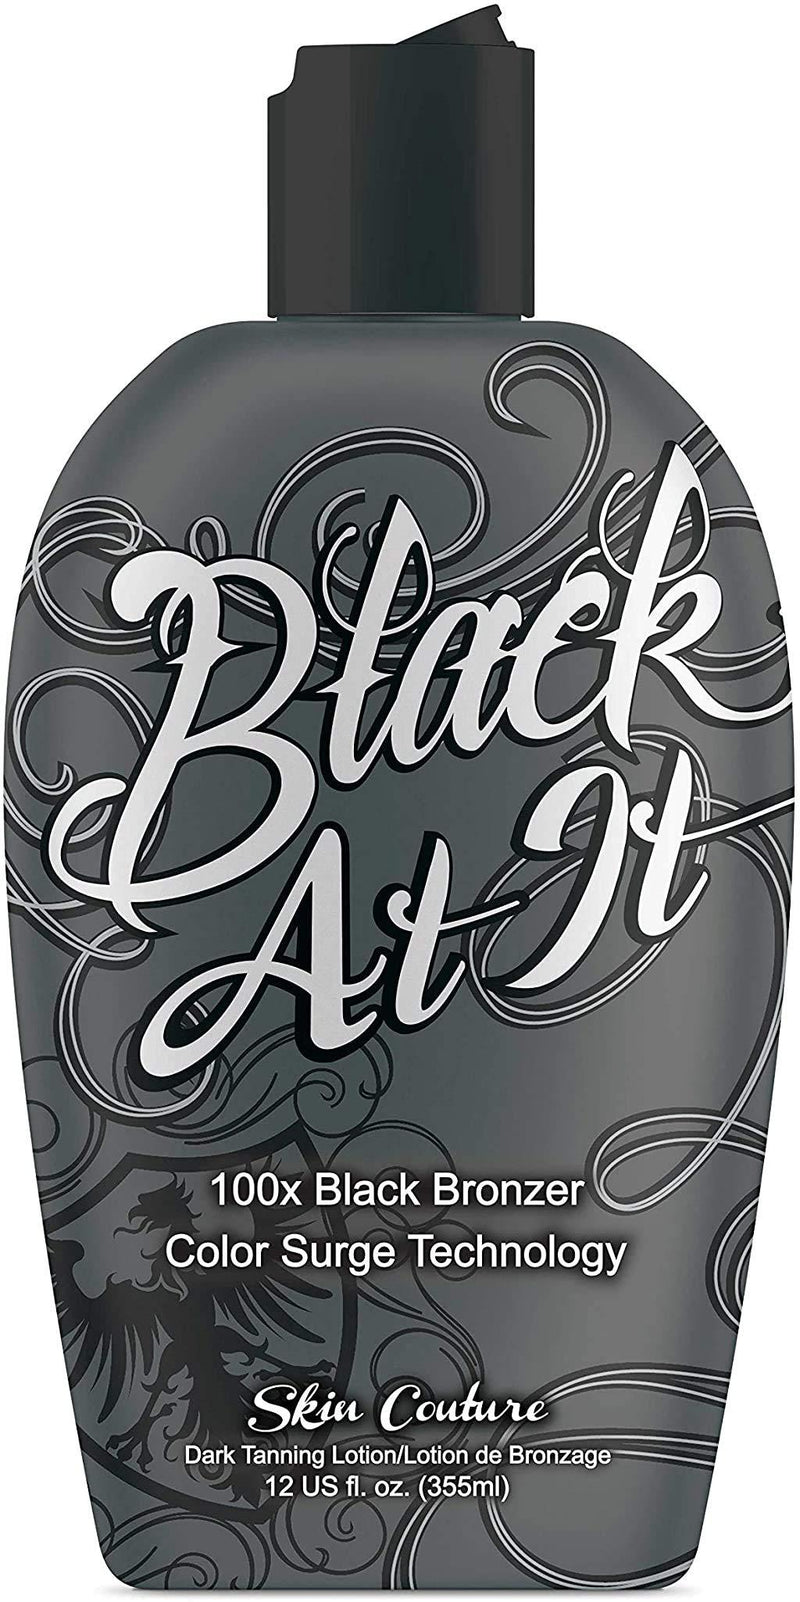 [Australia] - Best indoor tanning lotion for tanning beds Black at it Tanning Lotion tanning bed lotion with bronzer and accelerator | Instant Dark | Color Surge Technology | 100x Black Bronzer suntan lotion 